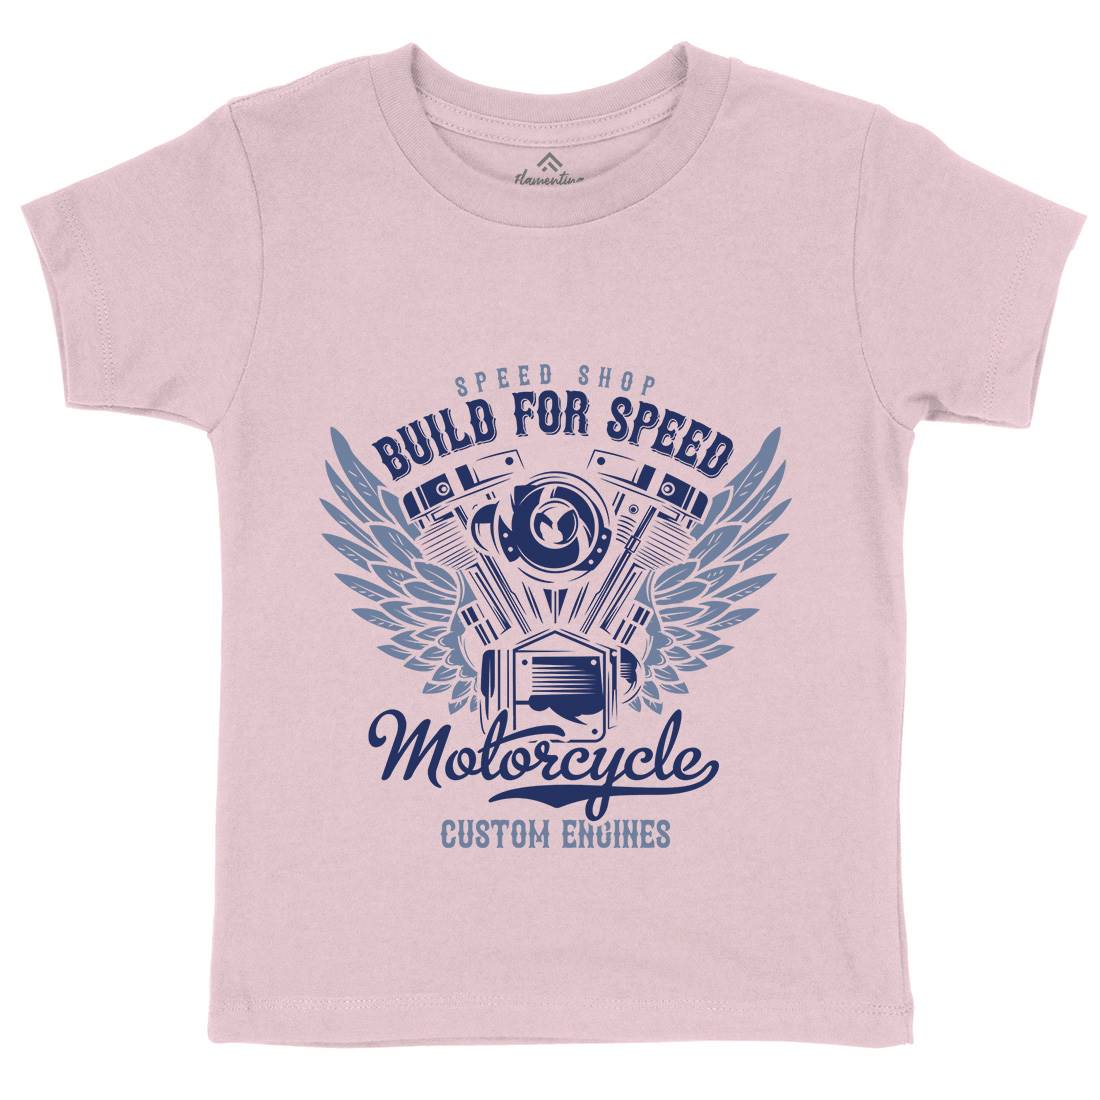 Build For Speed Kids Crew Neck T-Shirt Motorcycles B842